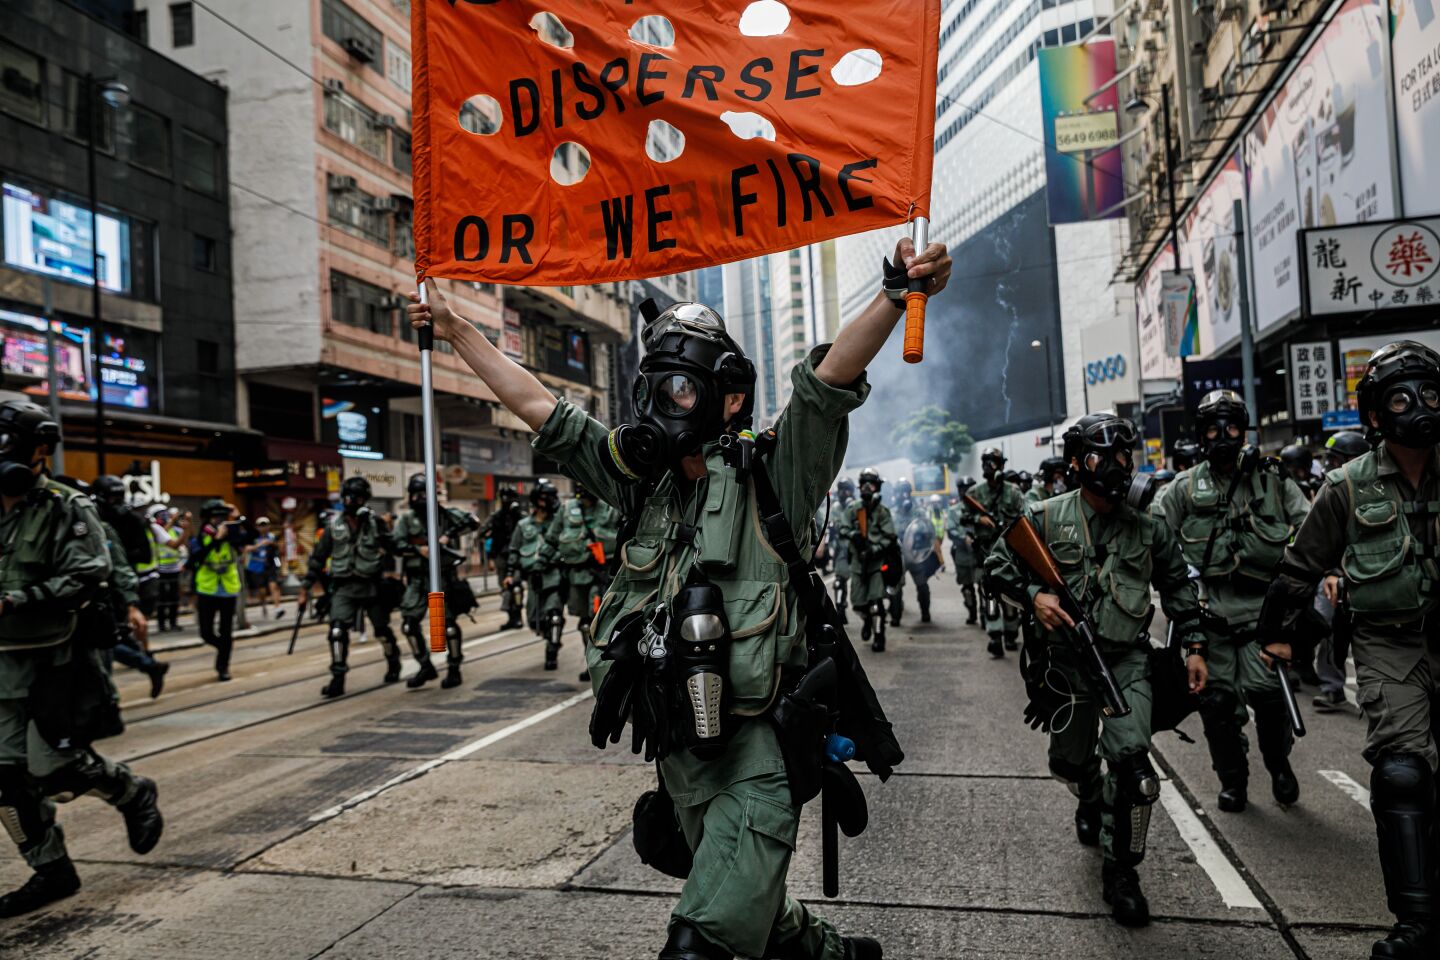 Hong Kong police officers in riot gear raise warning flags as they use tear gas to disperse demonstrators, gathering in defiance of the upcoming China's national day, in Causeway Bay area of Hong Kong, on Sept. 29, 2019.